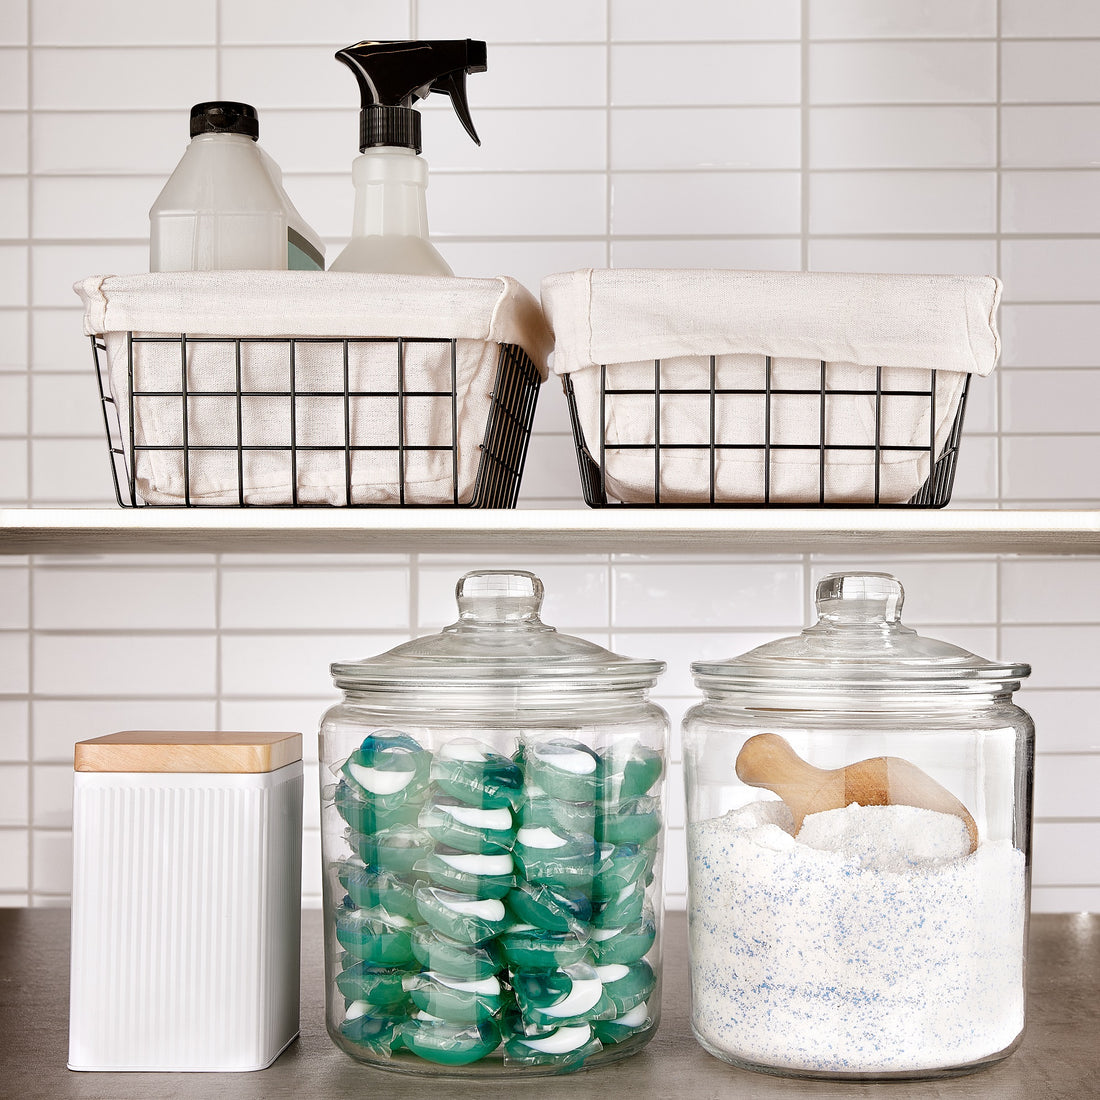 Storing Laundry Detergent Pods, Powder, and Liquid in Glass Jars and Pump Bottles